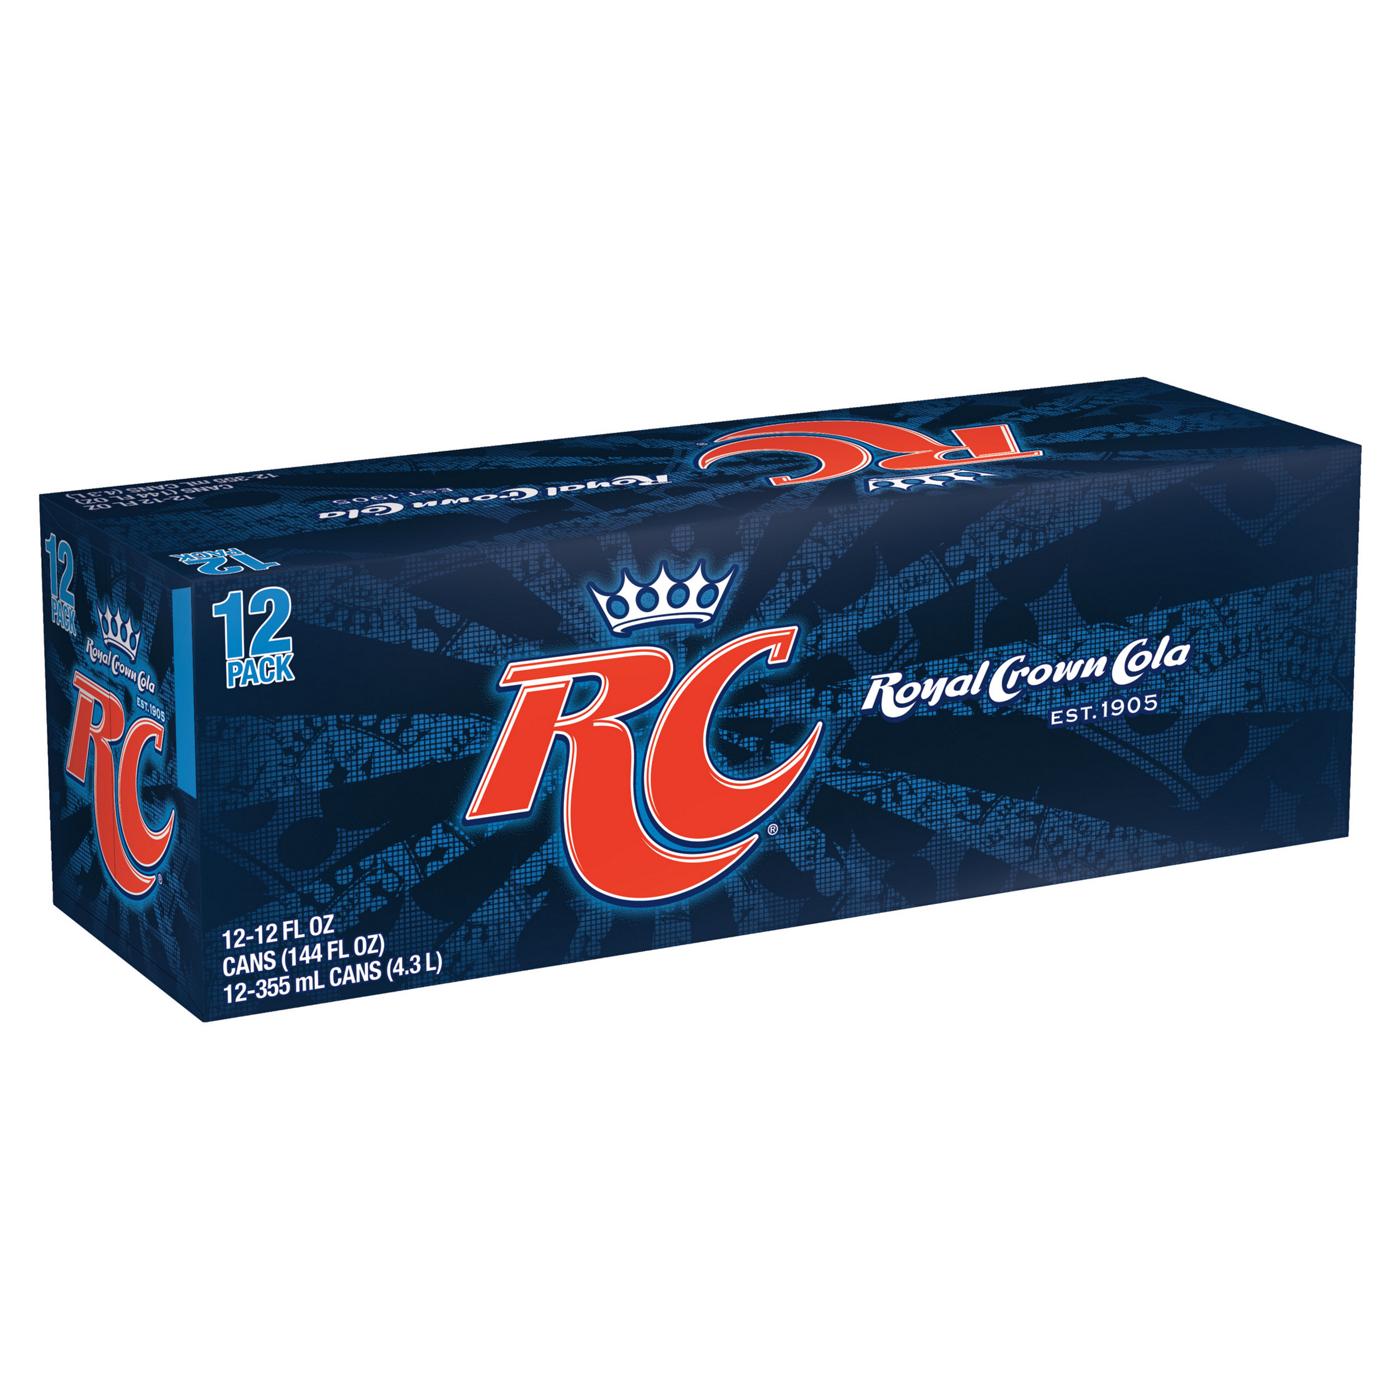 RC Cola 12 oz Cans; image 1 of 2